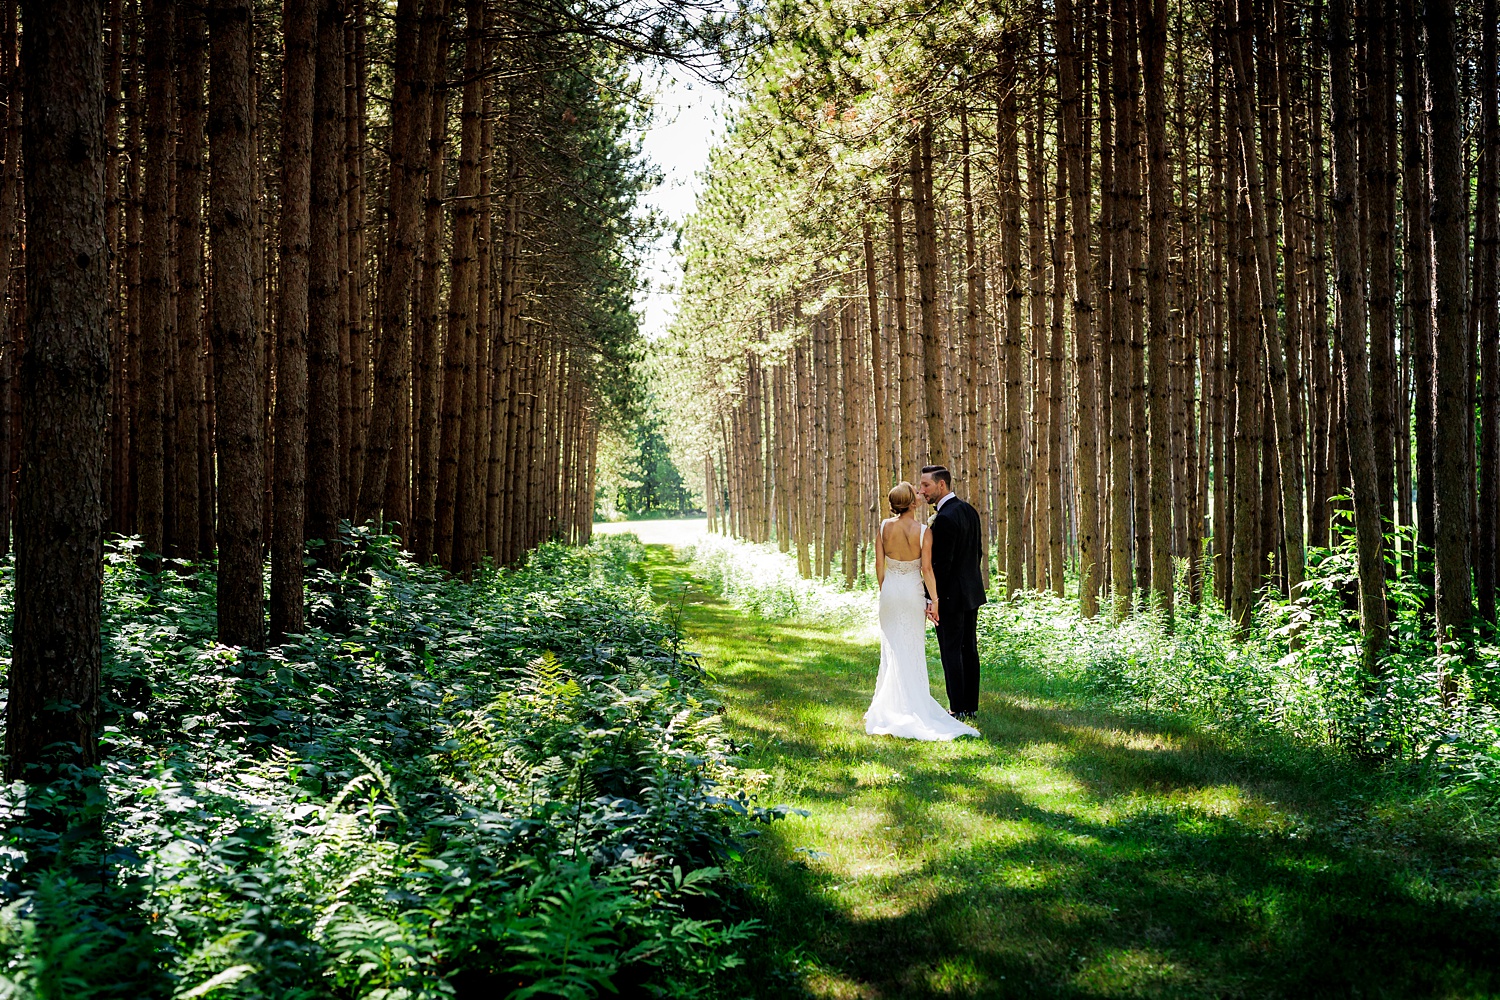 The newlyweds stand among the tall trees in the grove at Cunningham Farm in New Gloucester Maine